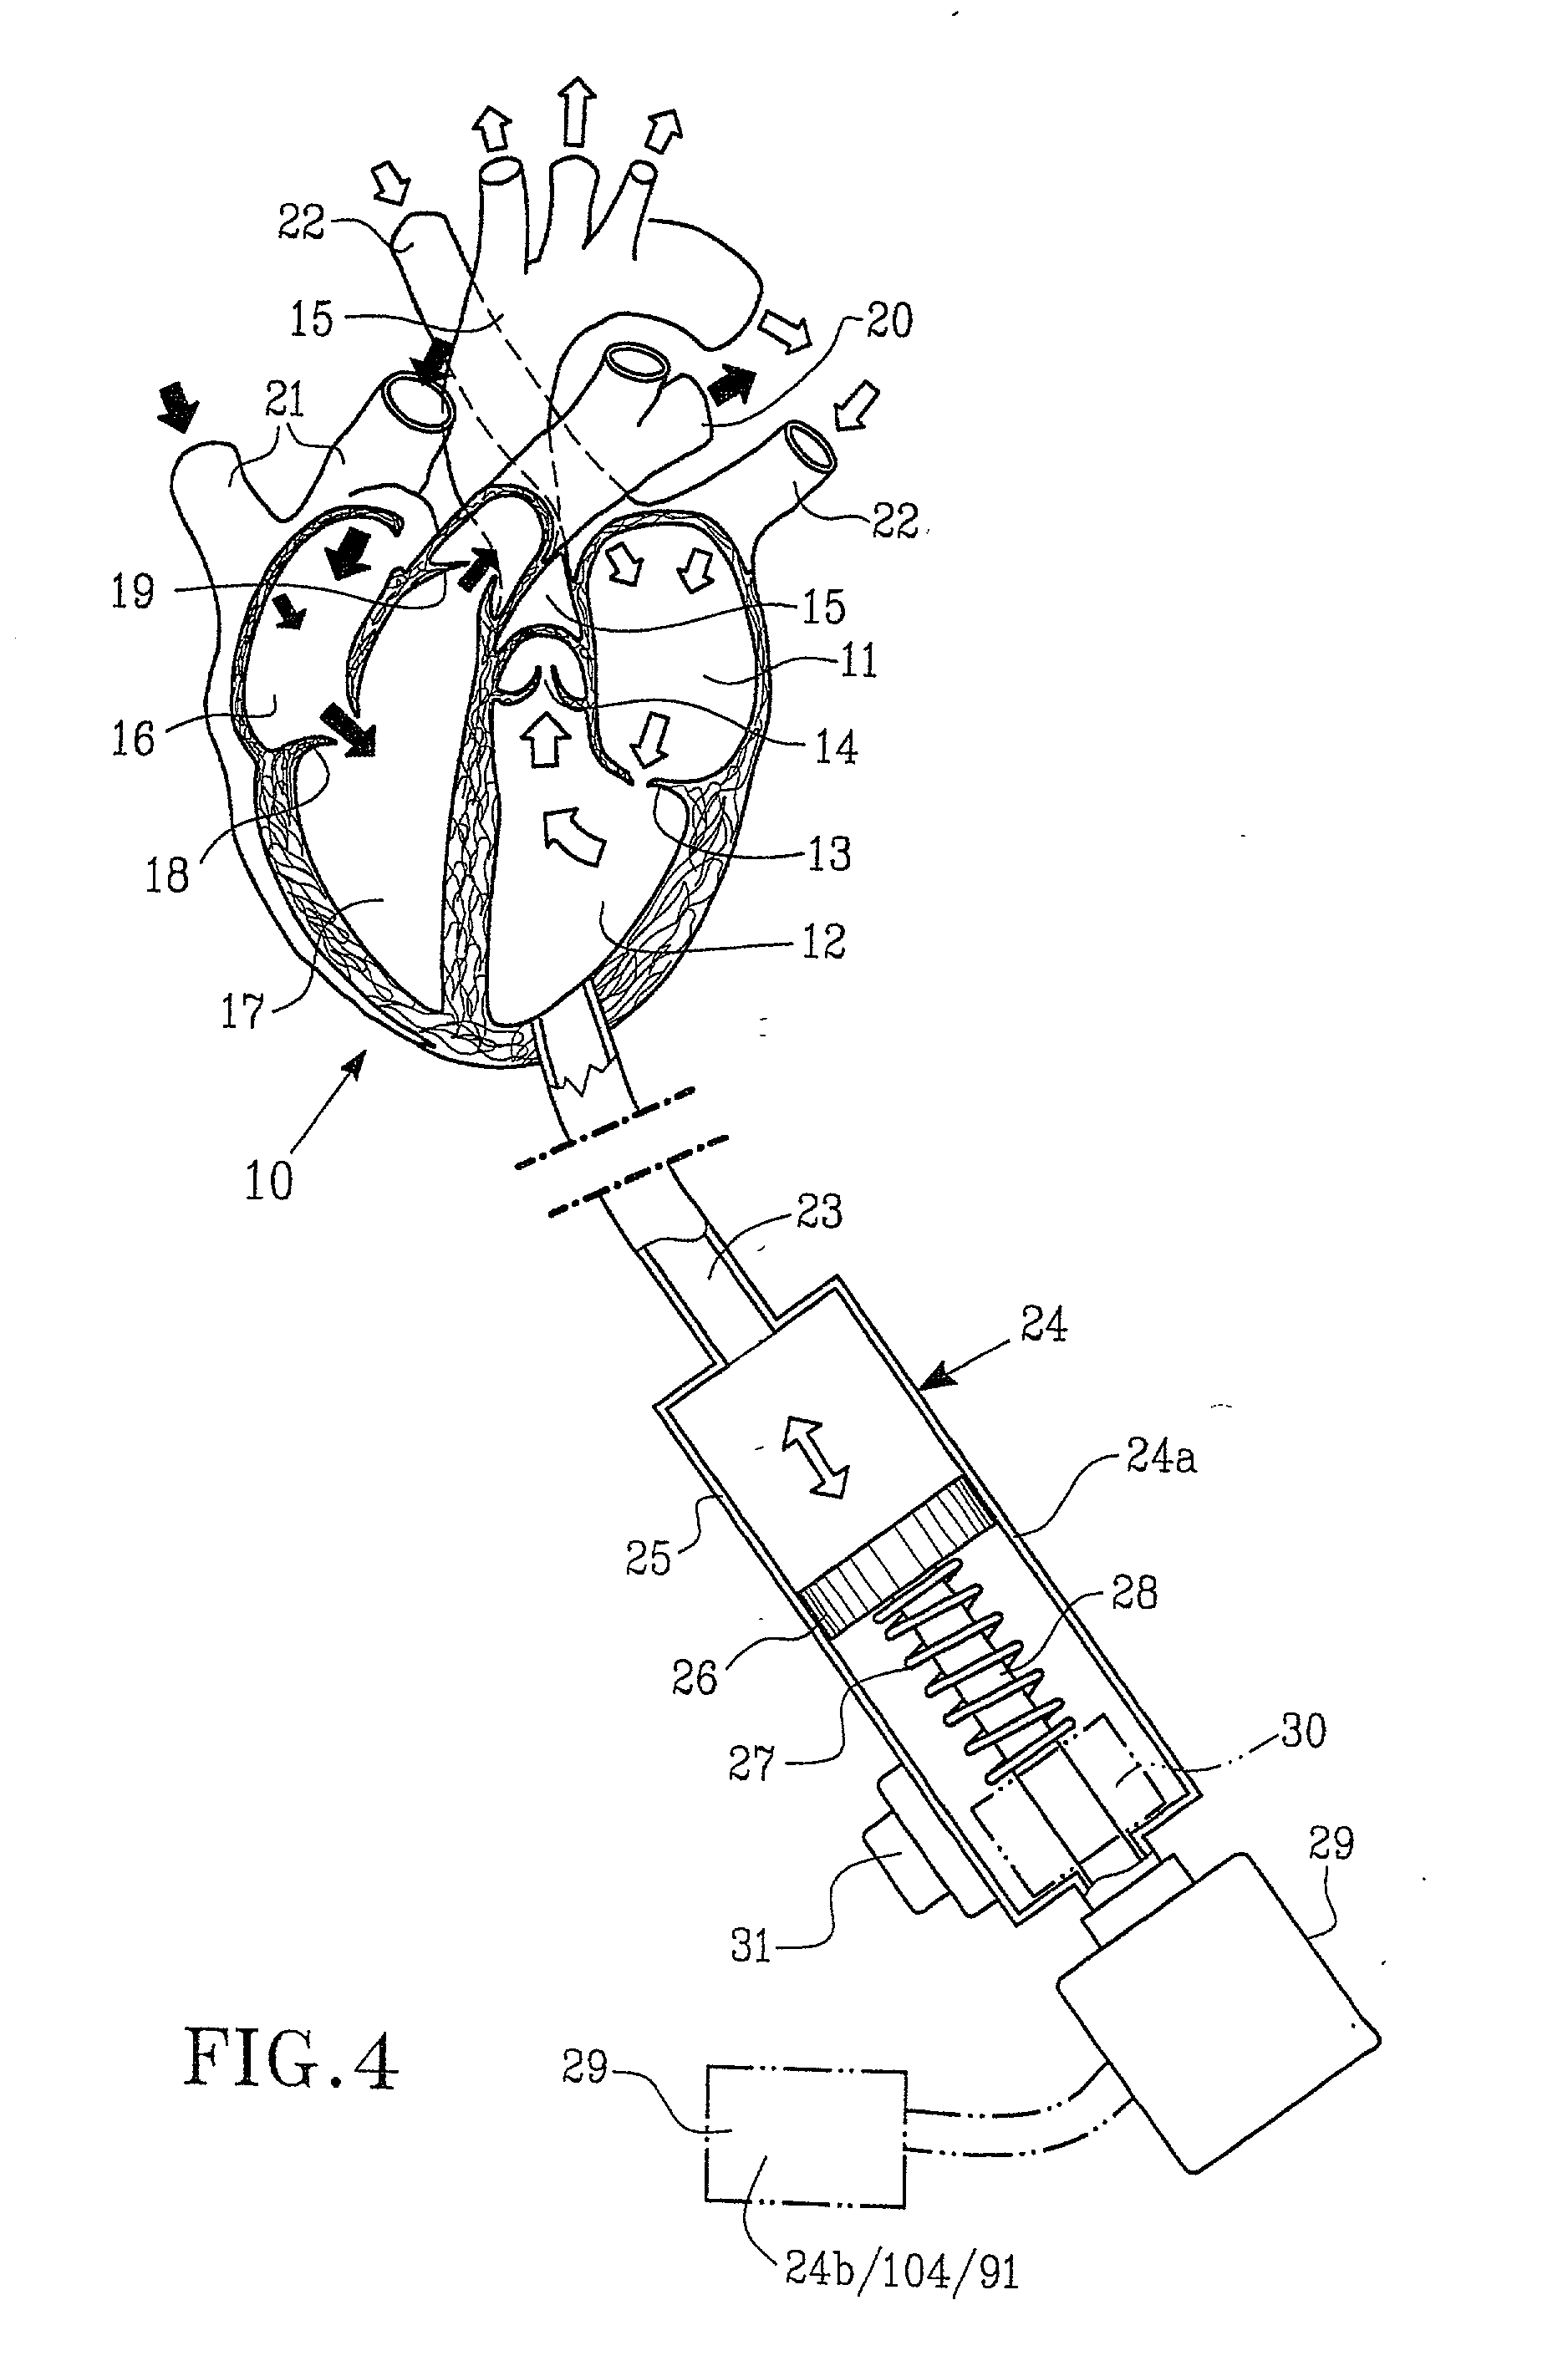 Implantable device for utilisation of the hydraulic energy of the heart